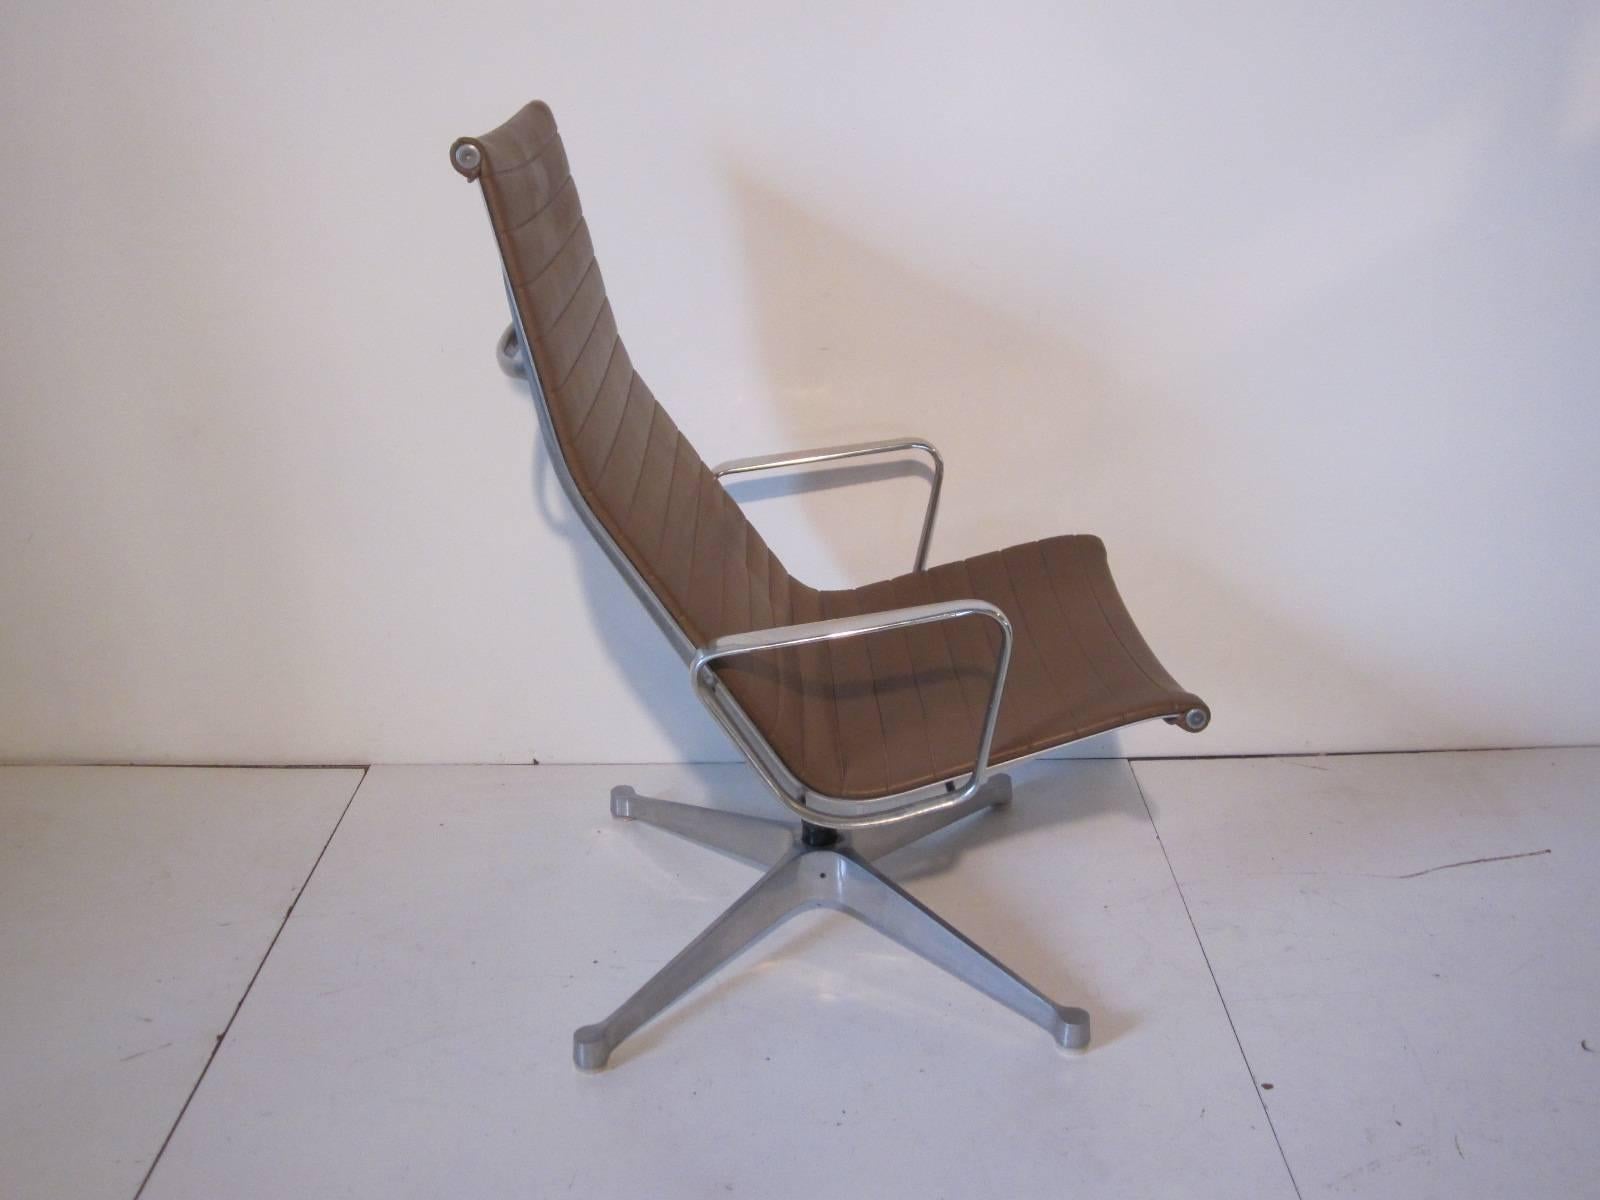 A Eames aluminum group tilting back lounge chair with medium saddle colored Naugahyde seat and aluminum arms and four star base. The chair does not swivel but has the optional spring fitted tilting base. Manufactured by the Herman Miller Furniture